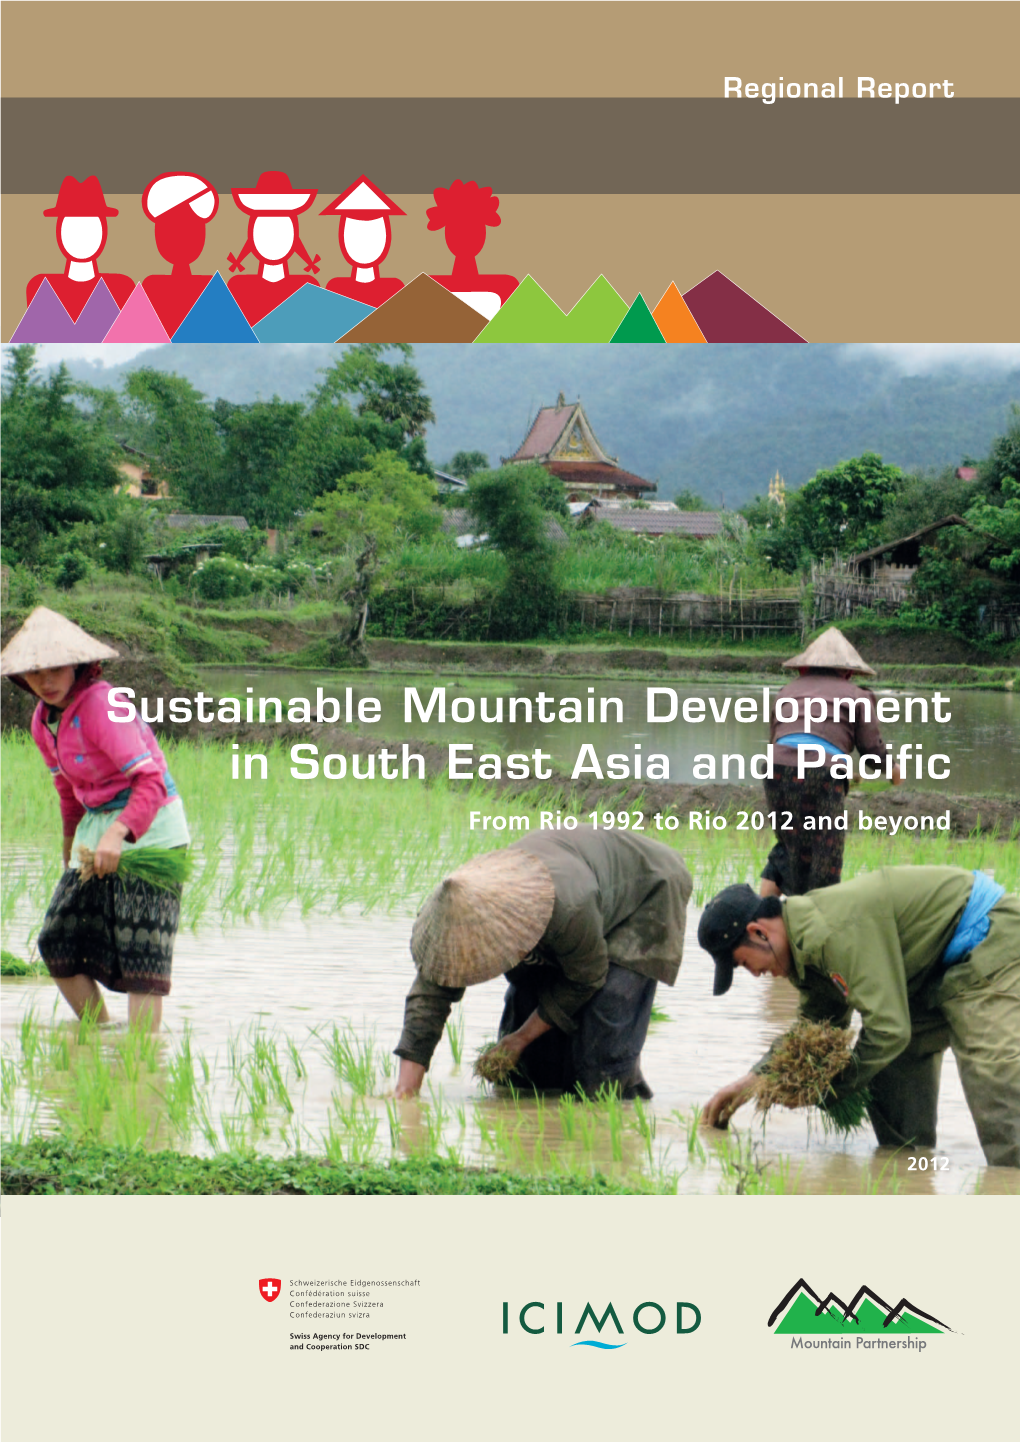 Sustainable Mountain Development in South East Asia and Pacific from Rio 1992 to Rio 2012 and Beyond